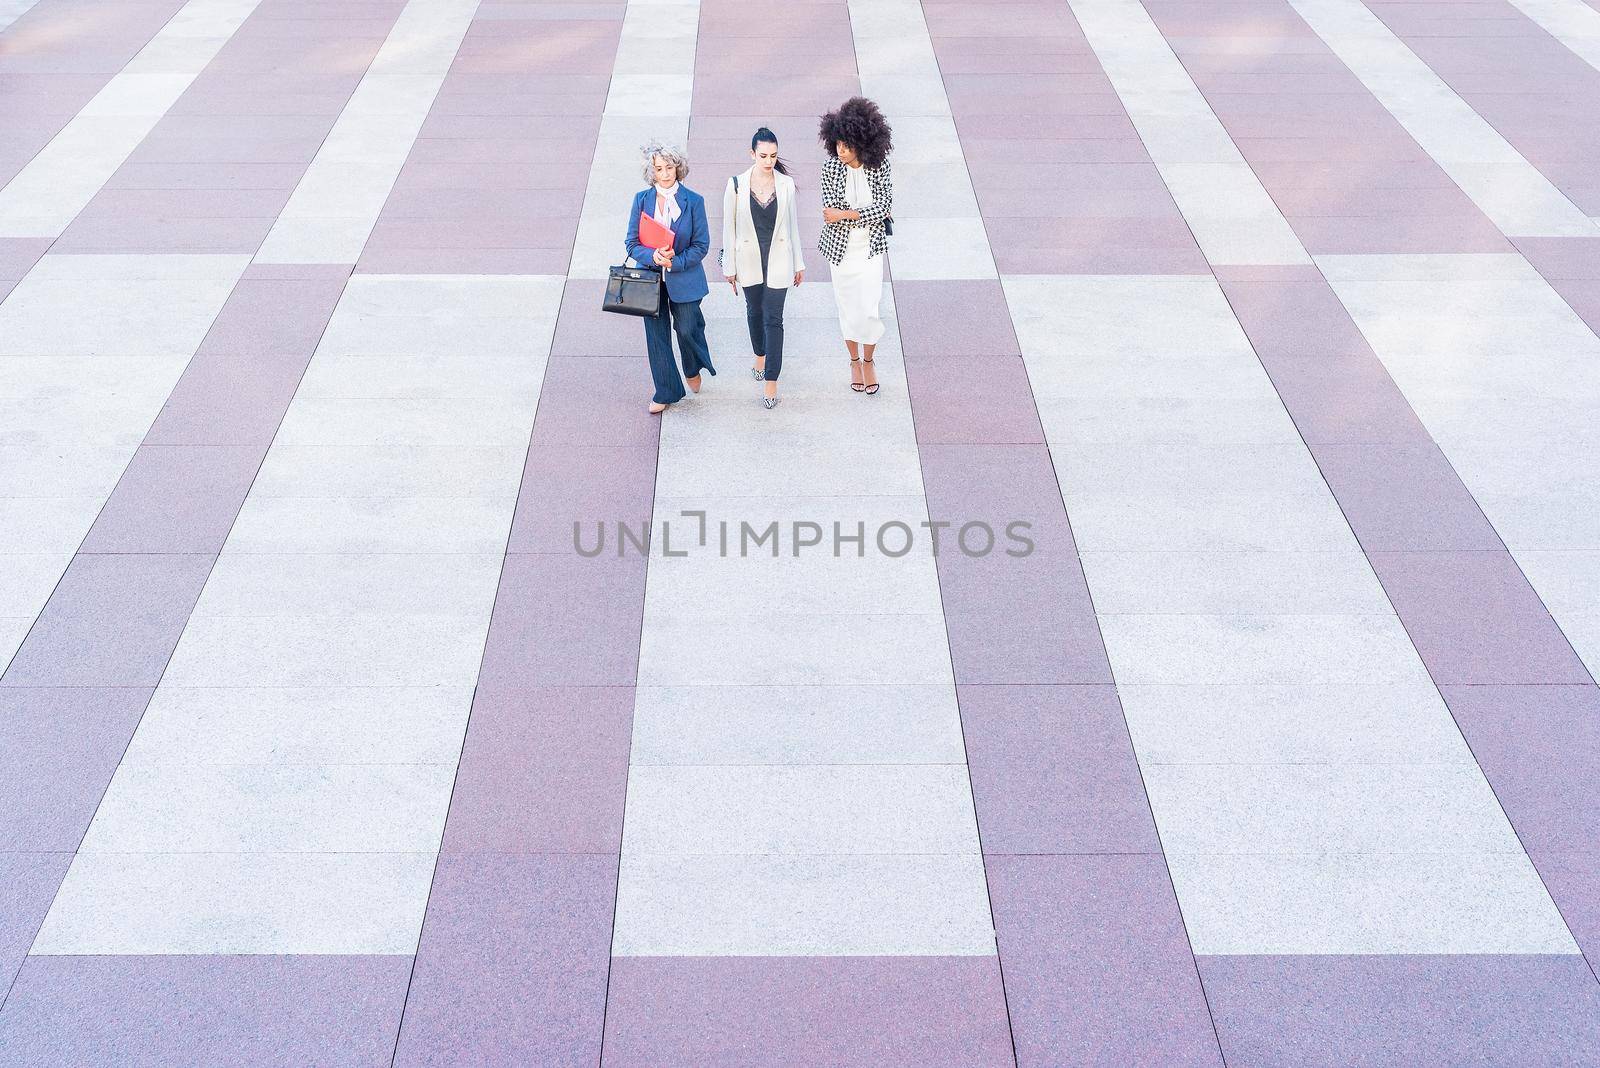 front view of three women in suits on a flagstone floor, horizontal alternate pattern